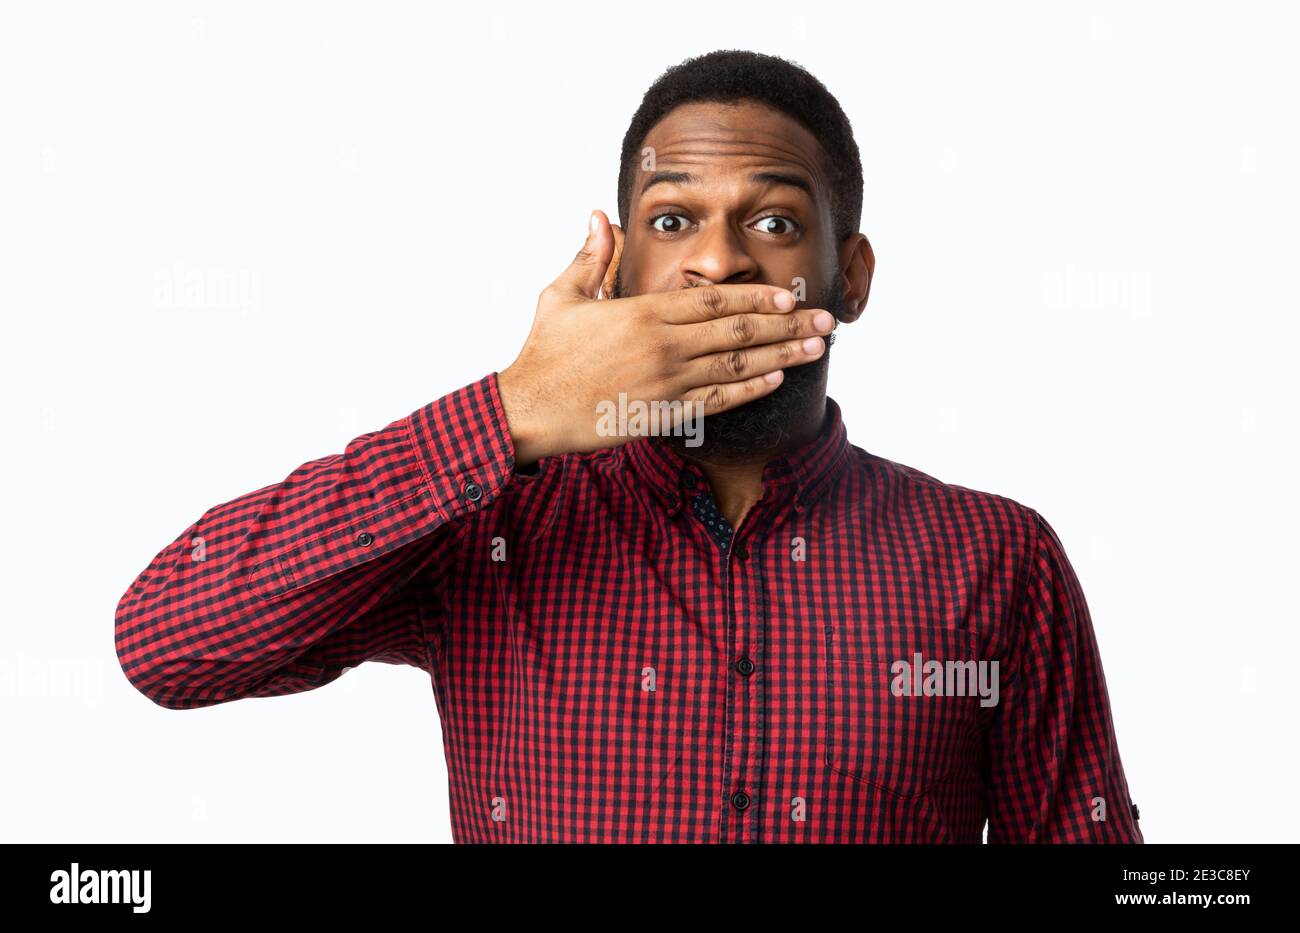 African Man Covering Mouth With Hand Posing Over White Background Stock Photo